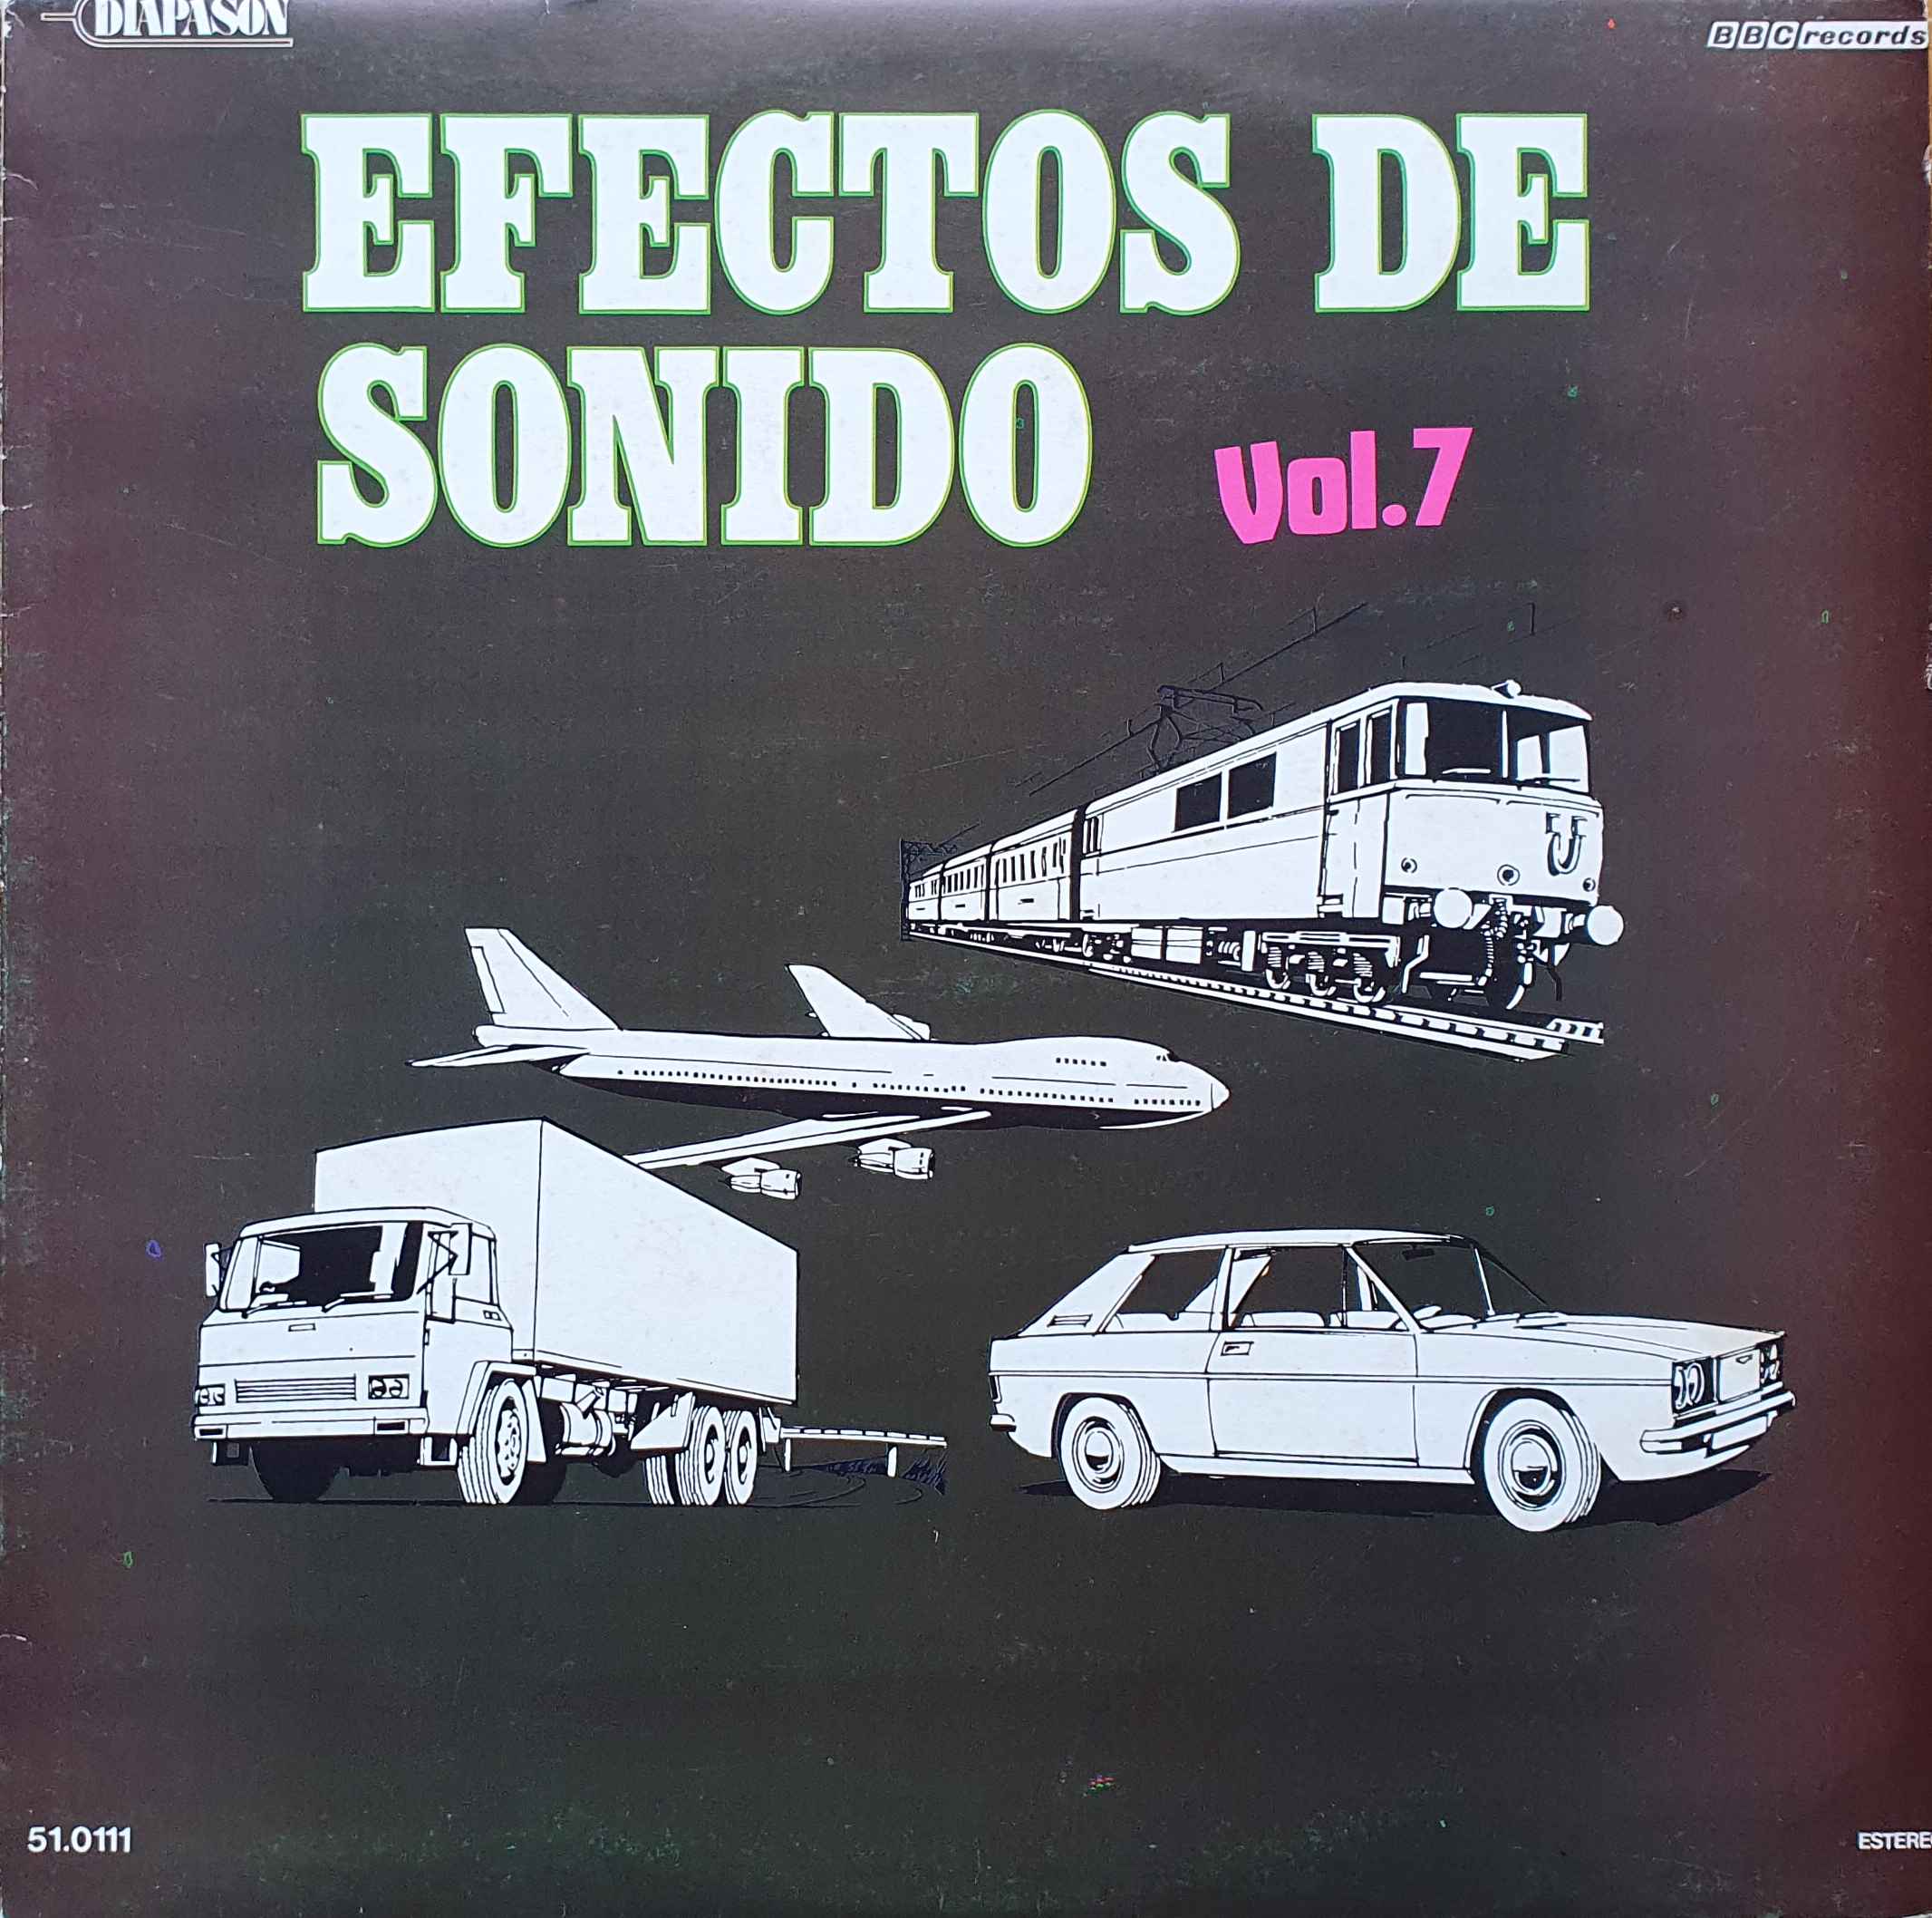 Picture of Efectos de sonido No 7 by artist Various from the BBC albums - Records and Tapes library